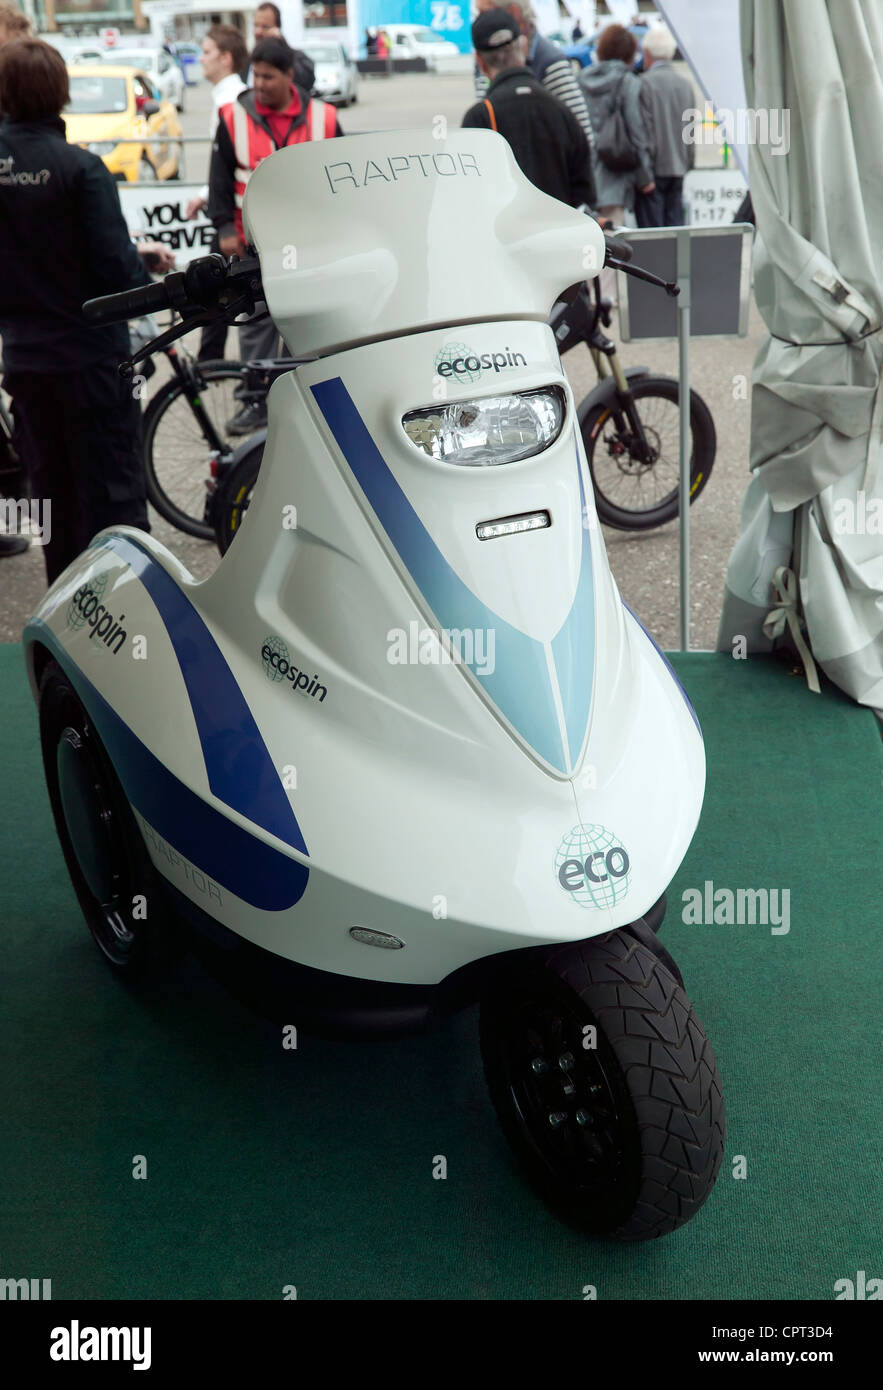 Image of an ecospin Raptor, a three wheele, [road legal]  personal electric vehicle on display at Ecovelocity 2011 Stock Photo